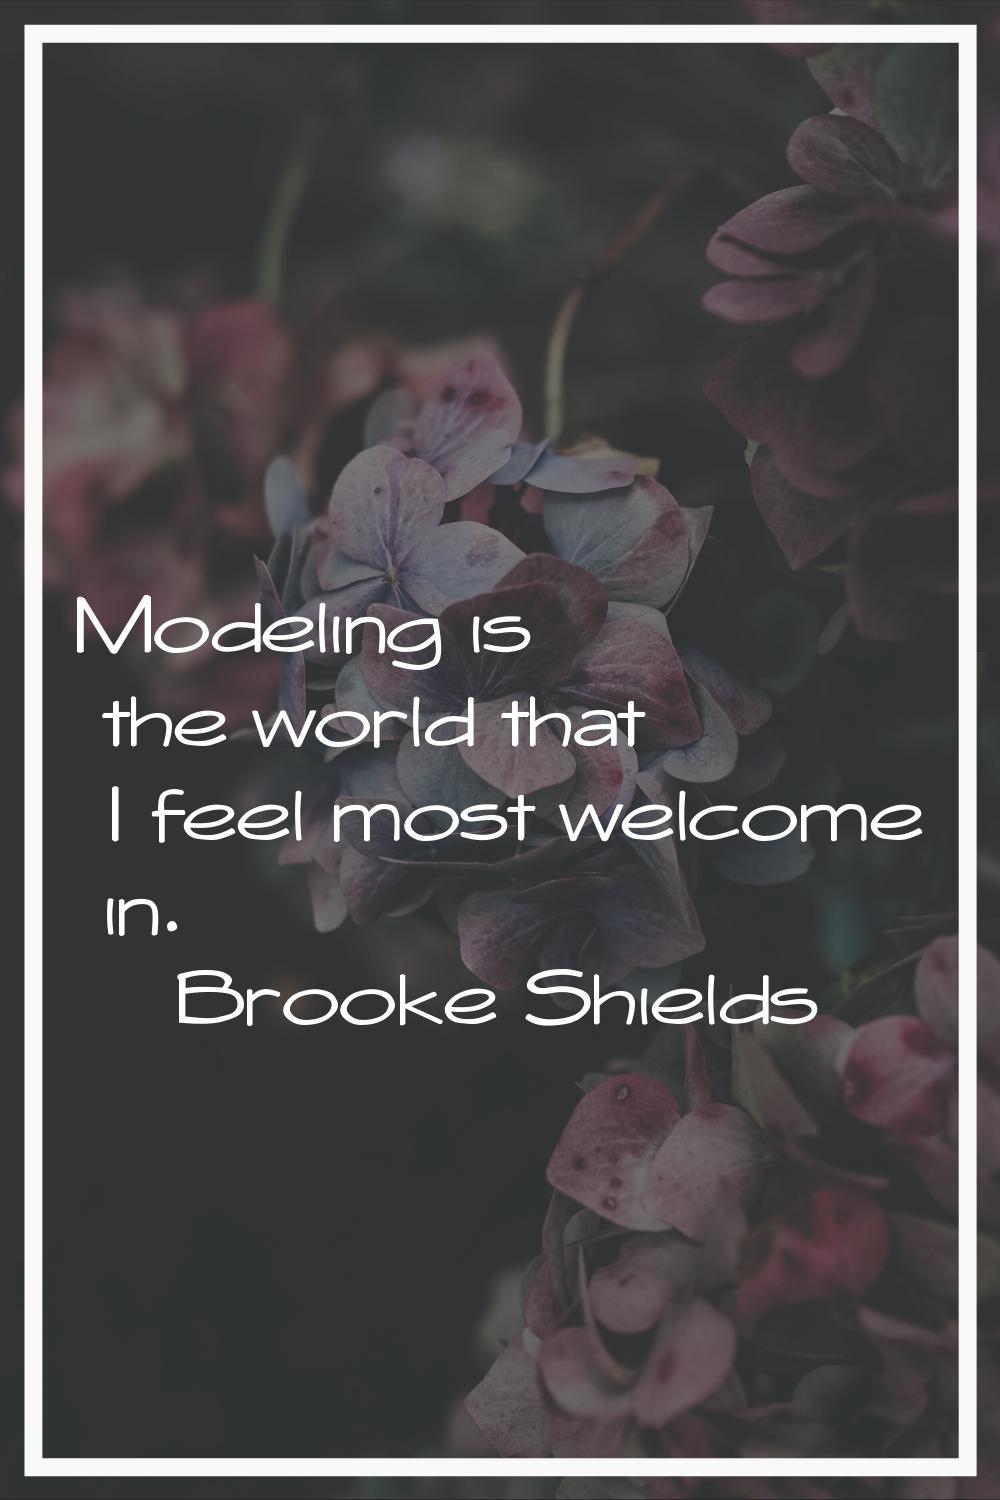 Modeling is the world that I feel most welcome in.